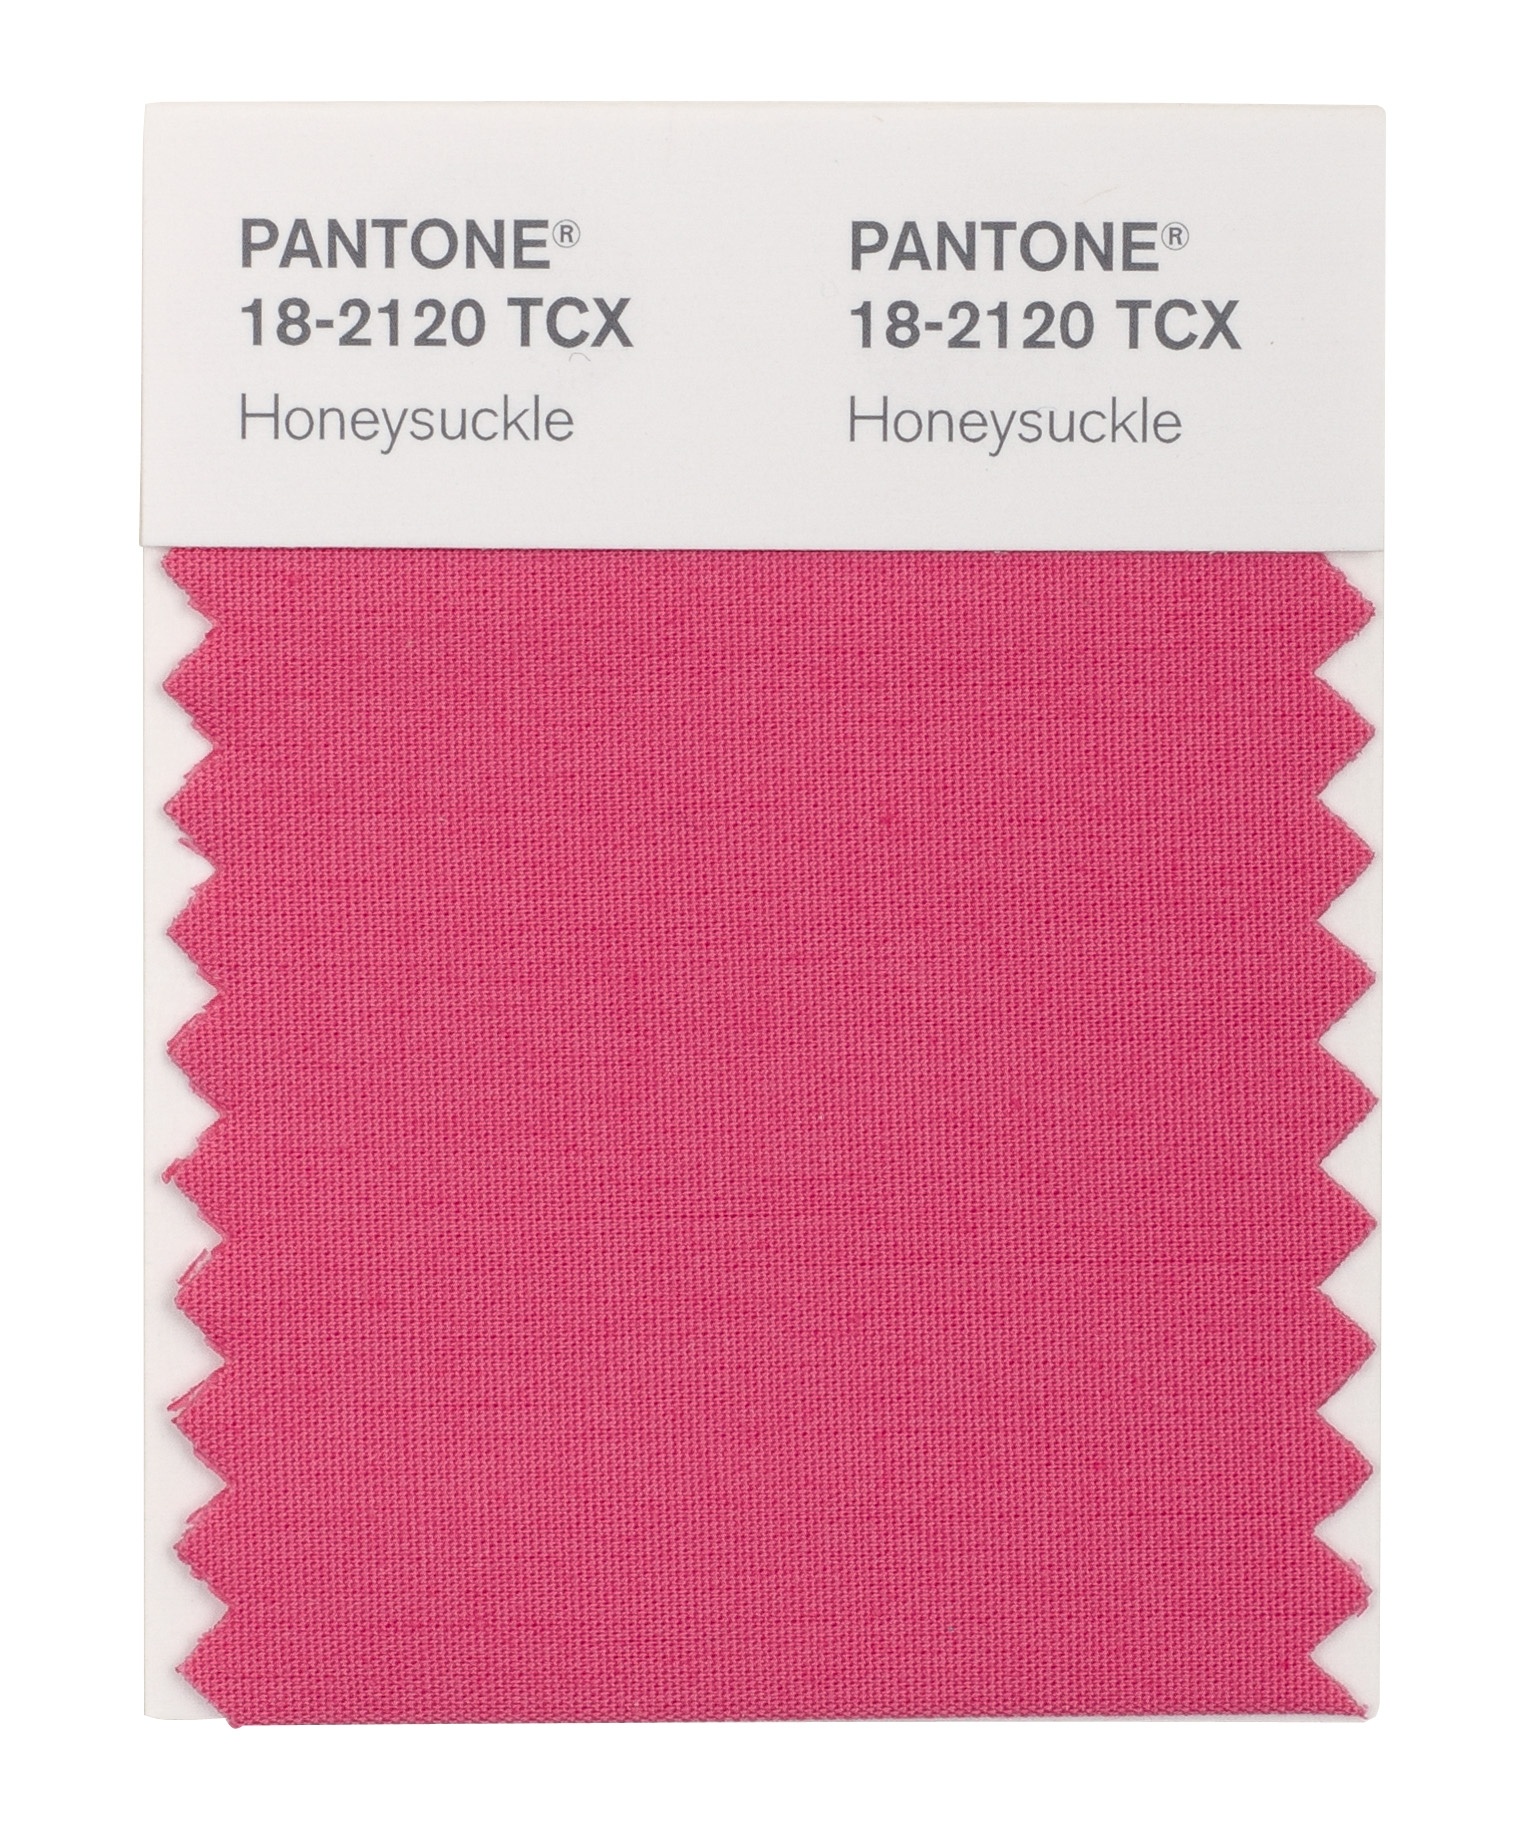 Pantone Reveals Color of the Year for 2011: PANTONE 18-2120 Honeysuckle